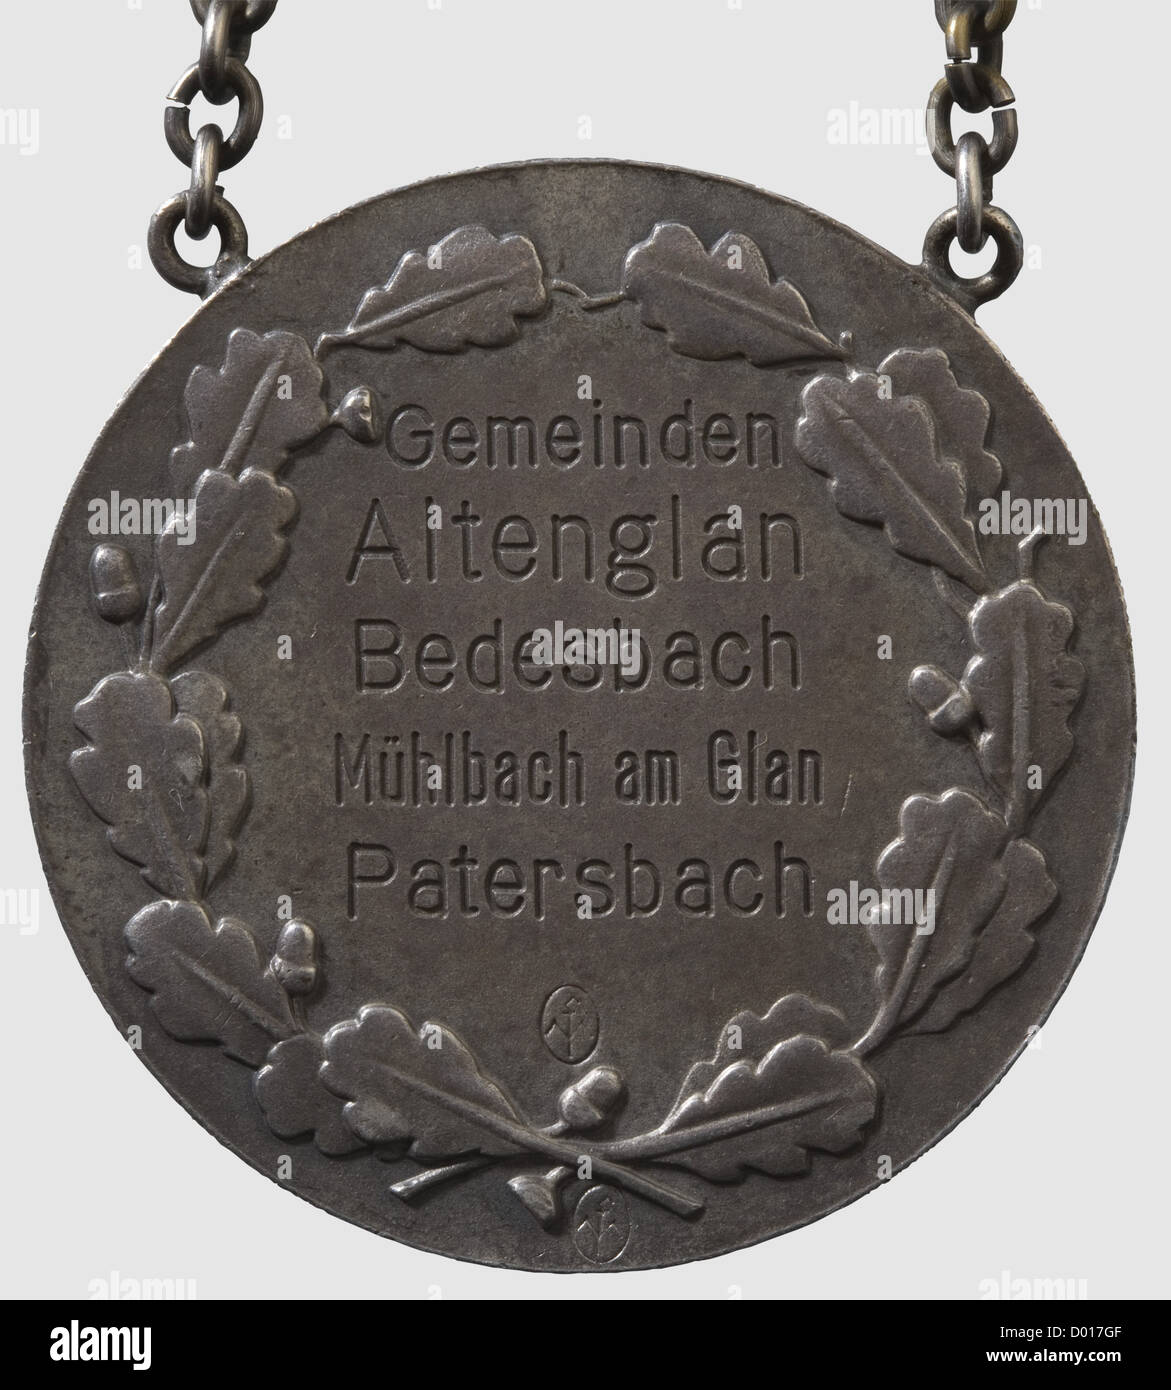 A Burgomaster's Chain for the municipalities of Alternglan,Bedesbach,Mühlbach on Glan and Patersbach,Silver medallion with in relief and circumsription 'Der Führer und Reichskanzler Adolf Hitler'.Reverse with corresponding engraving and master's mark 'Mf'.Diameter 50 mm.Chain shield with the engraved names of the federated municipalities.Chain with alternating crossed oak leaves and coats of arms with applied national eagles,DAF- and 'Reichsnährstand' emblems.Weight ca.389 g.Included a later exhibition case,historic,historical,1930s,1930s,20th c,Additional-Rights-Clearences-Not Available Stock Photo